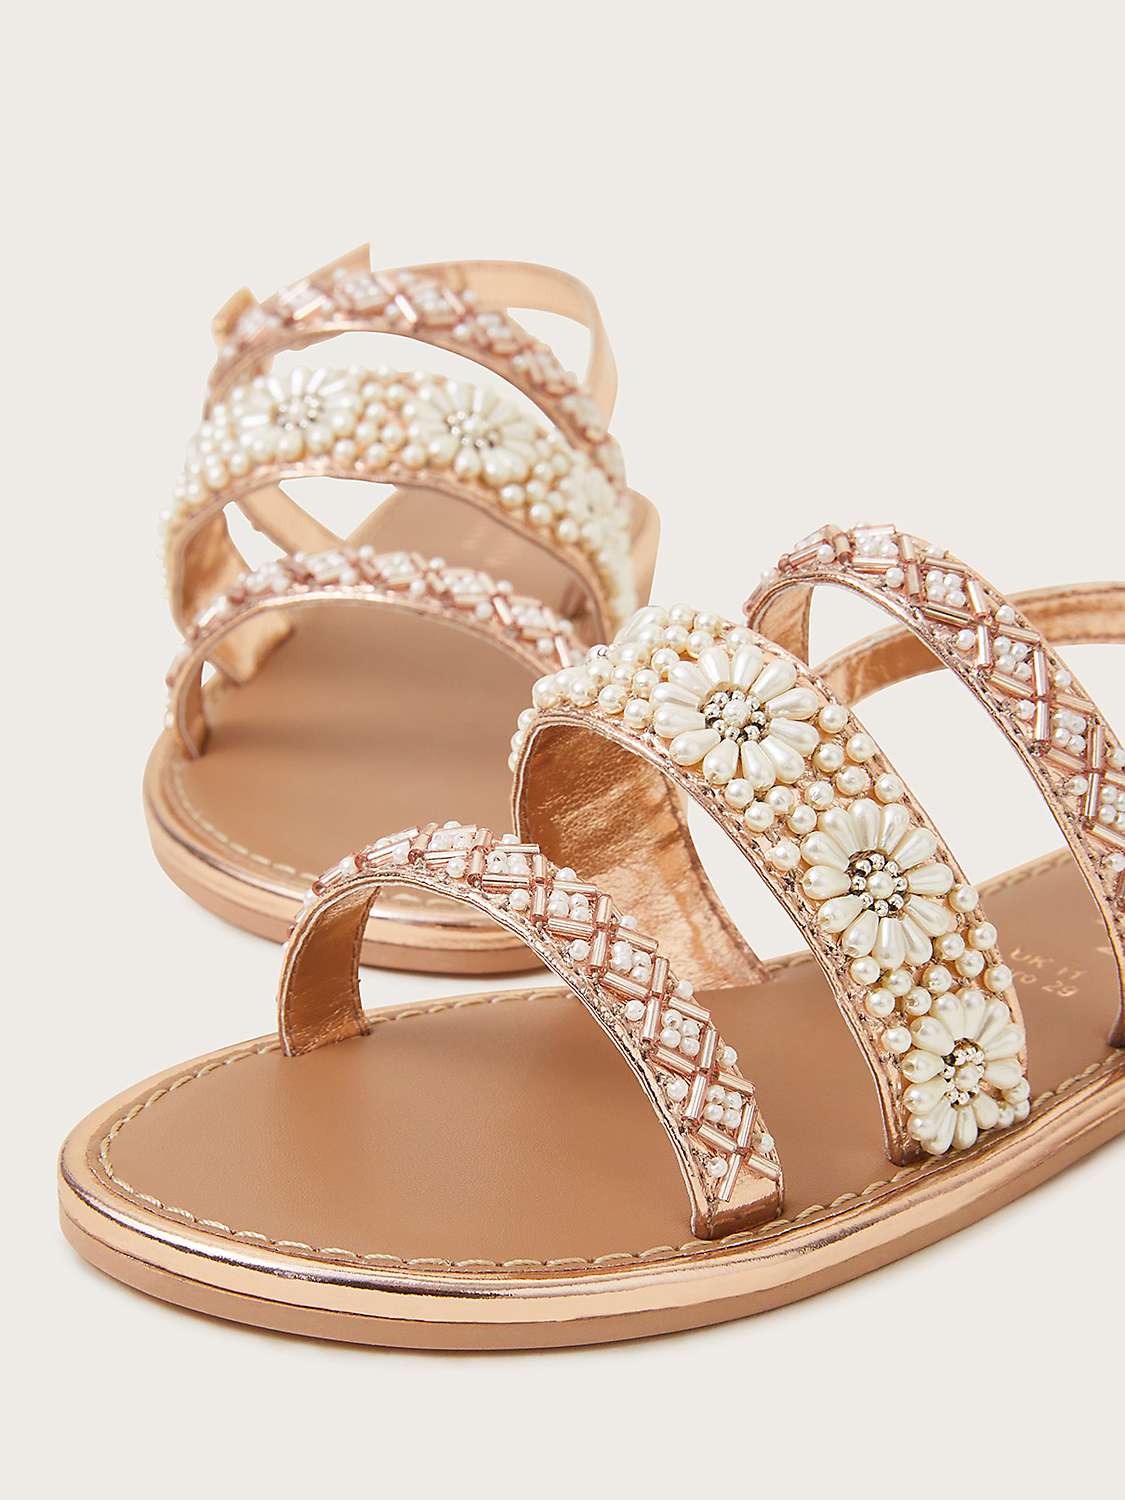 Buy Monsoon Kids' Pearly Beaded Flower Sandals, Rose Gold Online at johnlewis.com